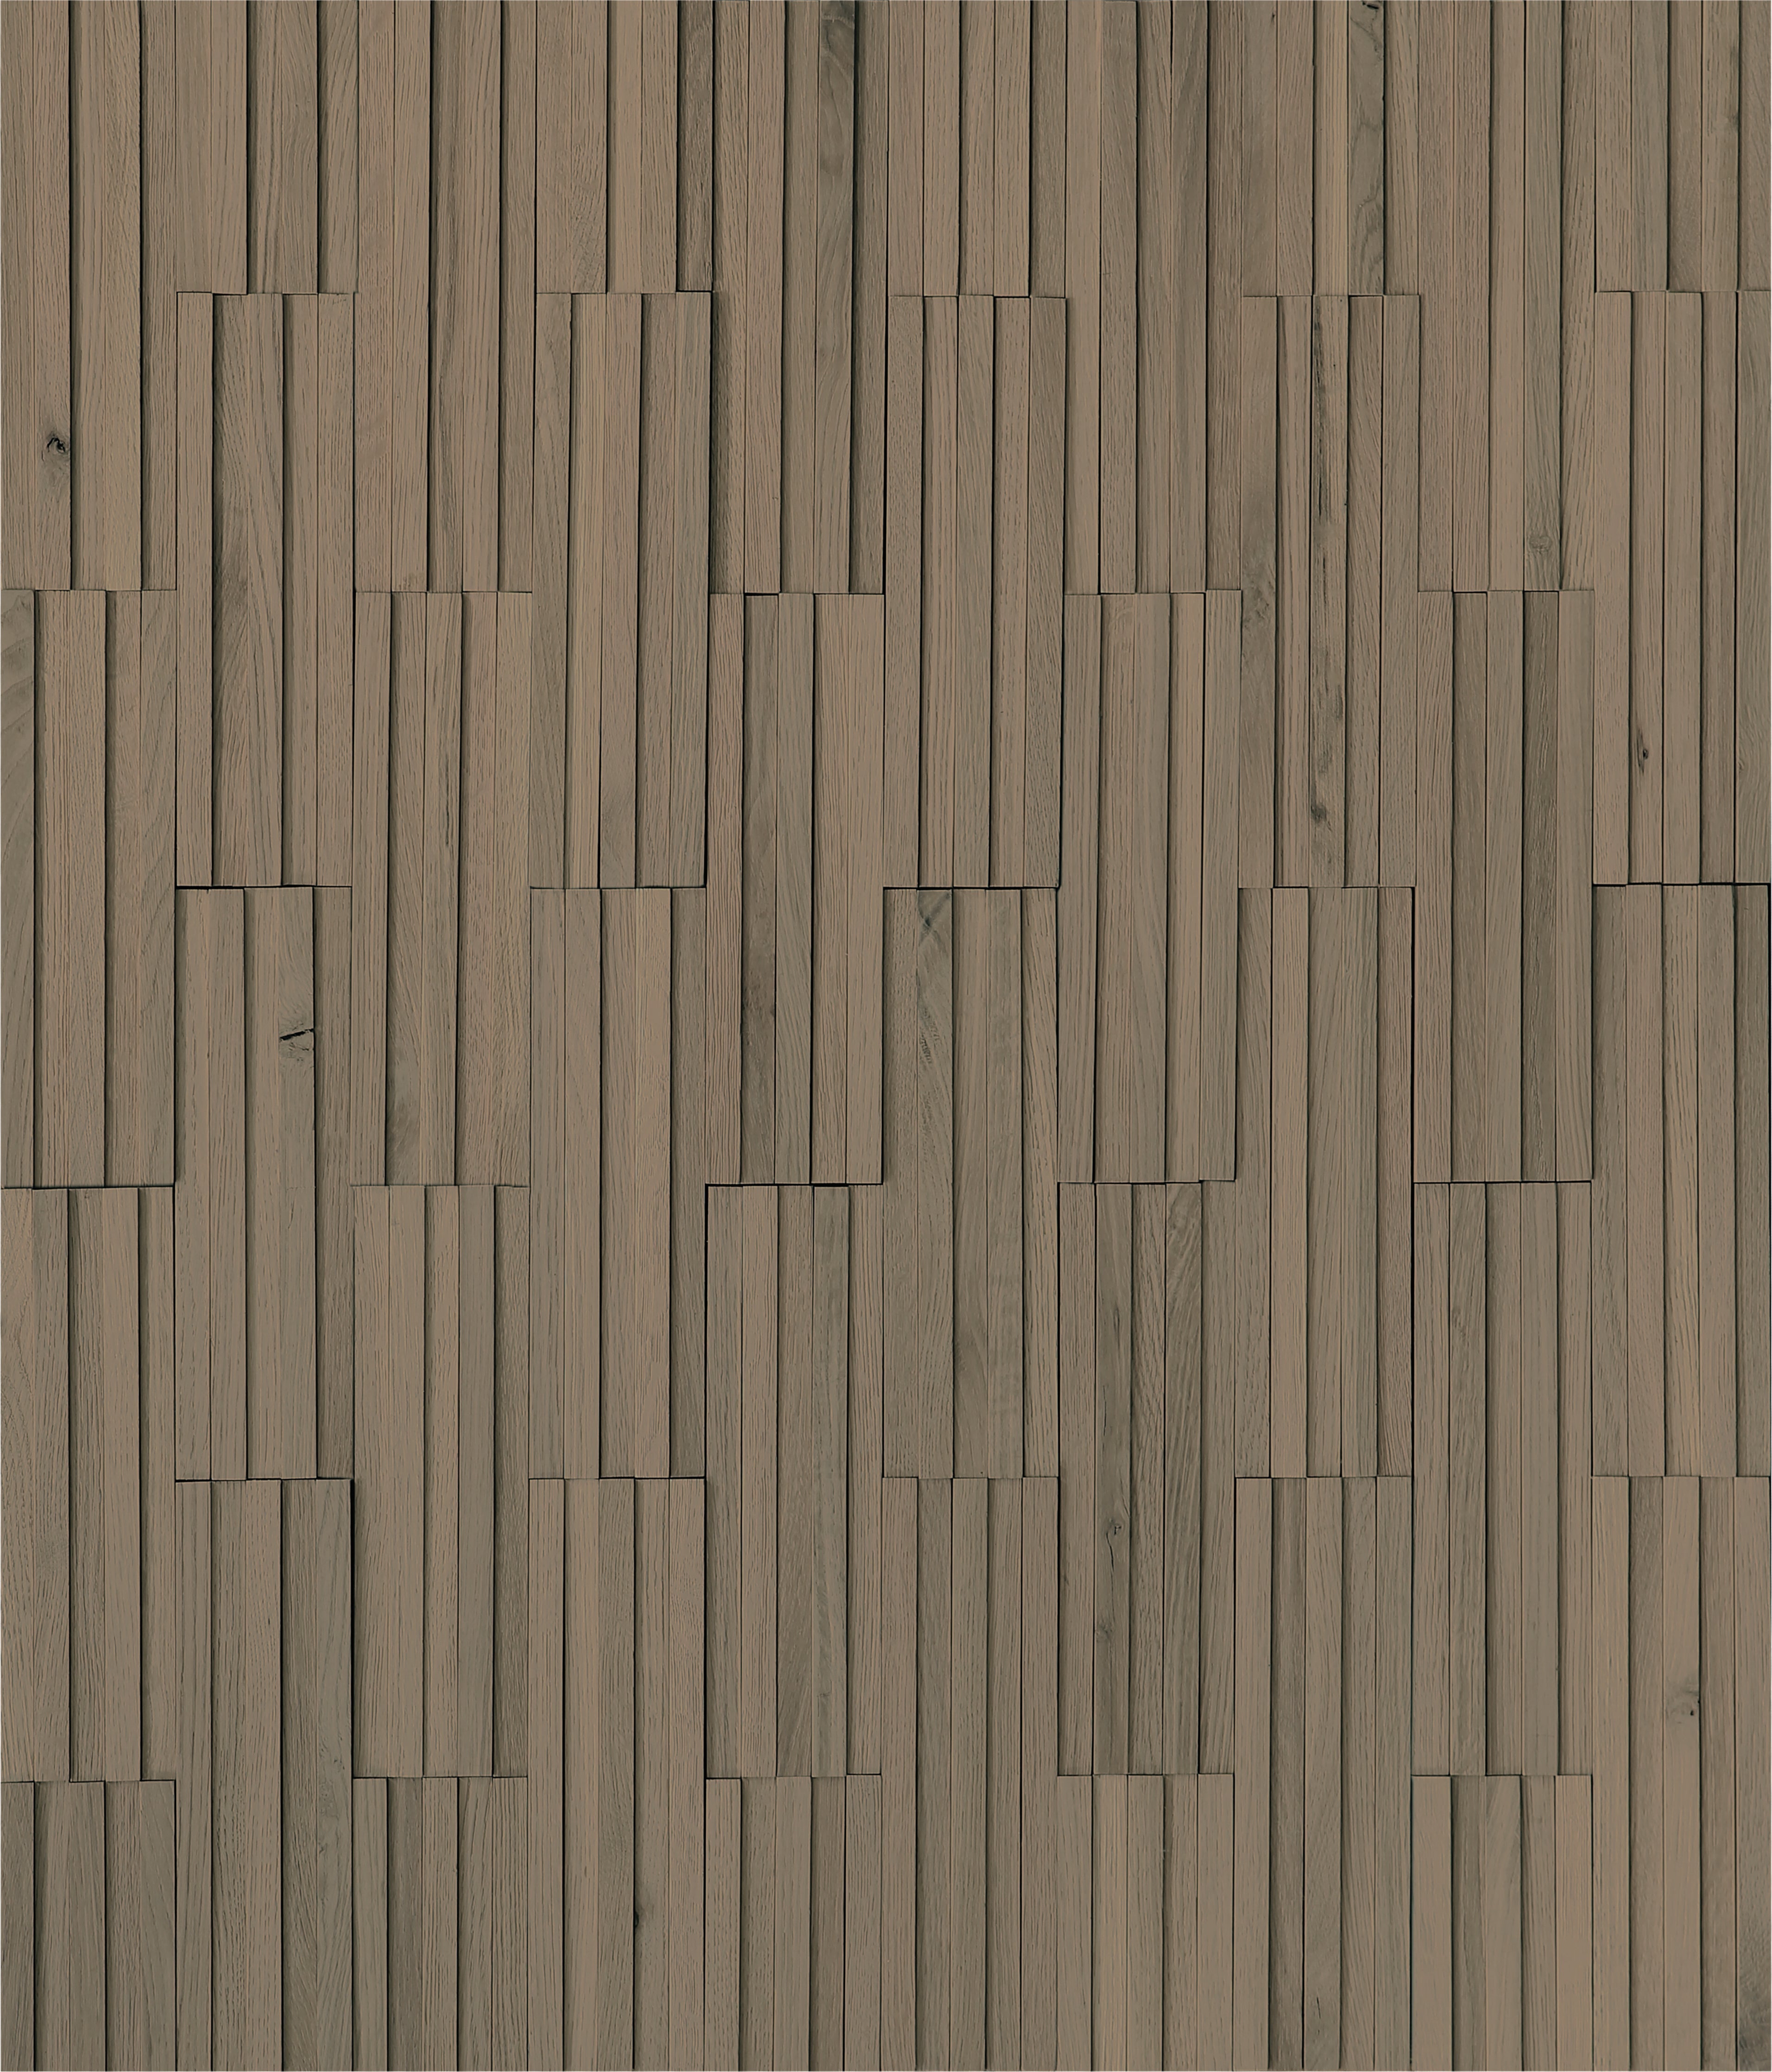 duchateau inceptiv parallels smoke oak three dimensional wall natural wood panel matte lacquer for interior use distributed by surface group international